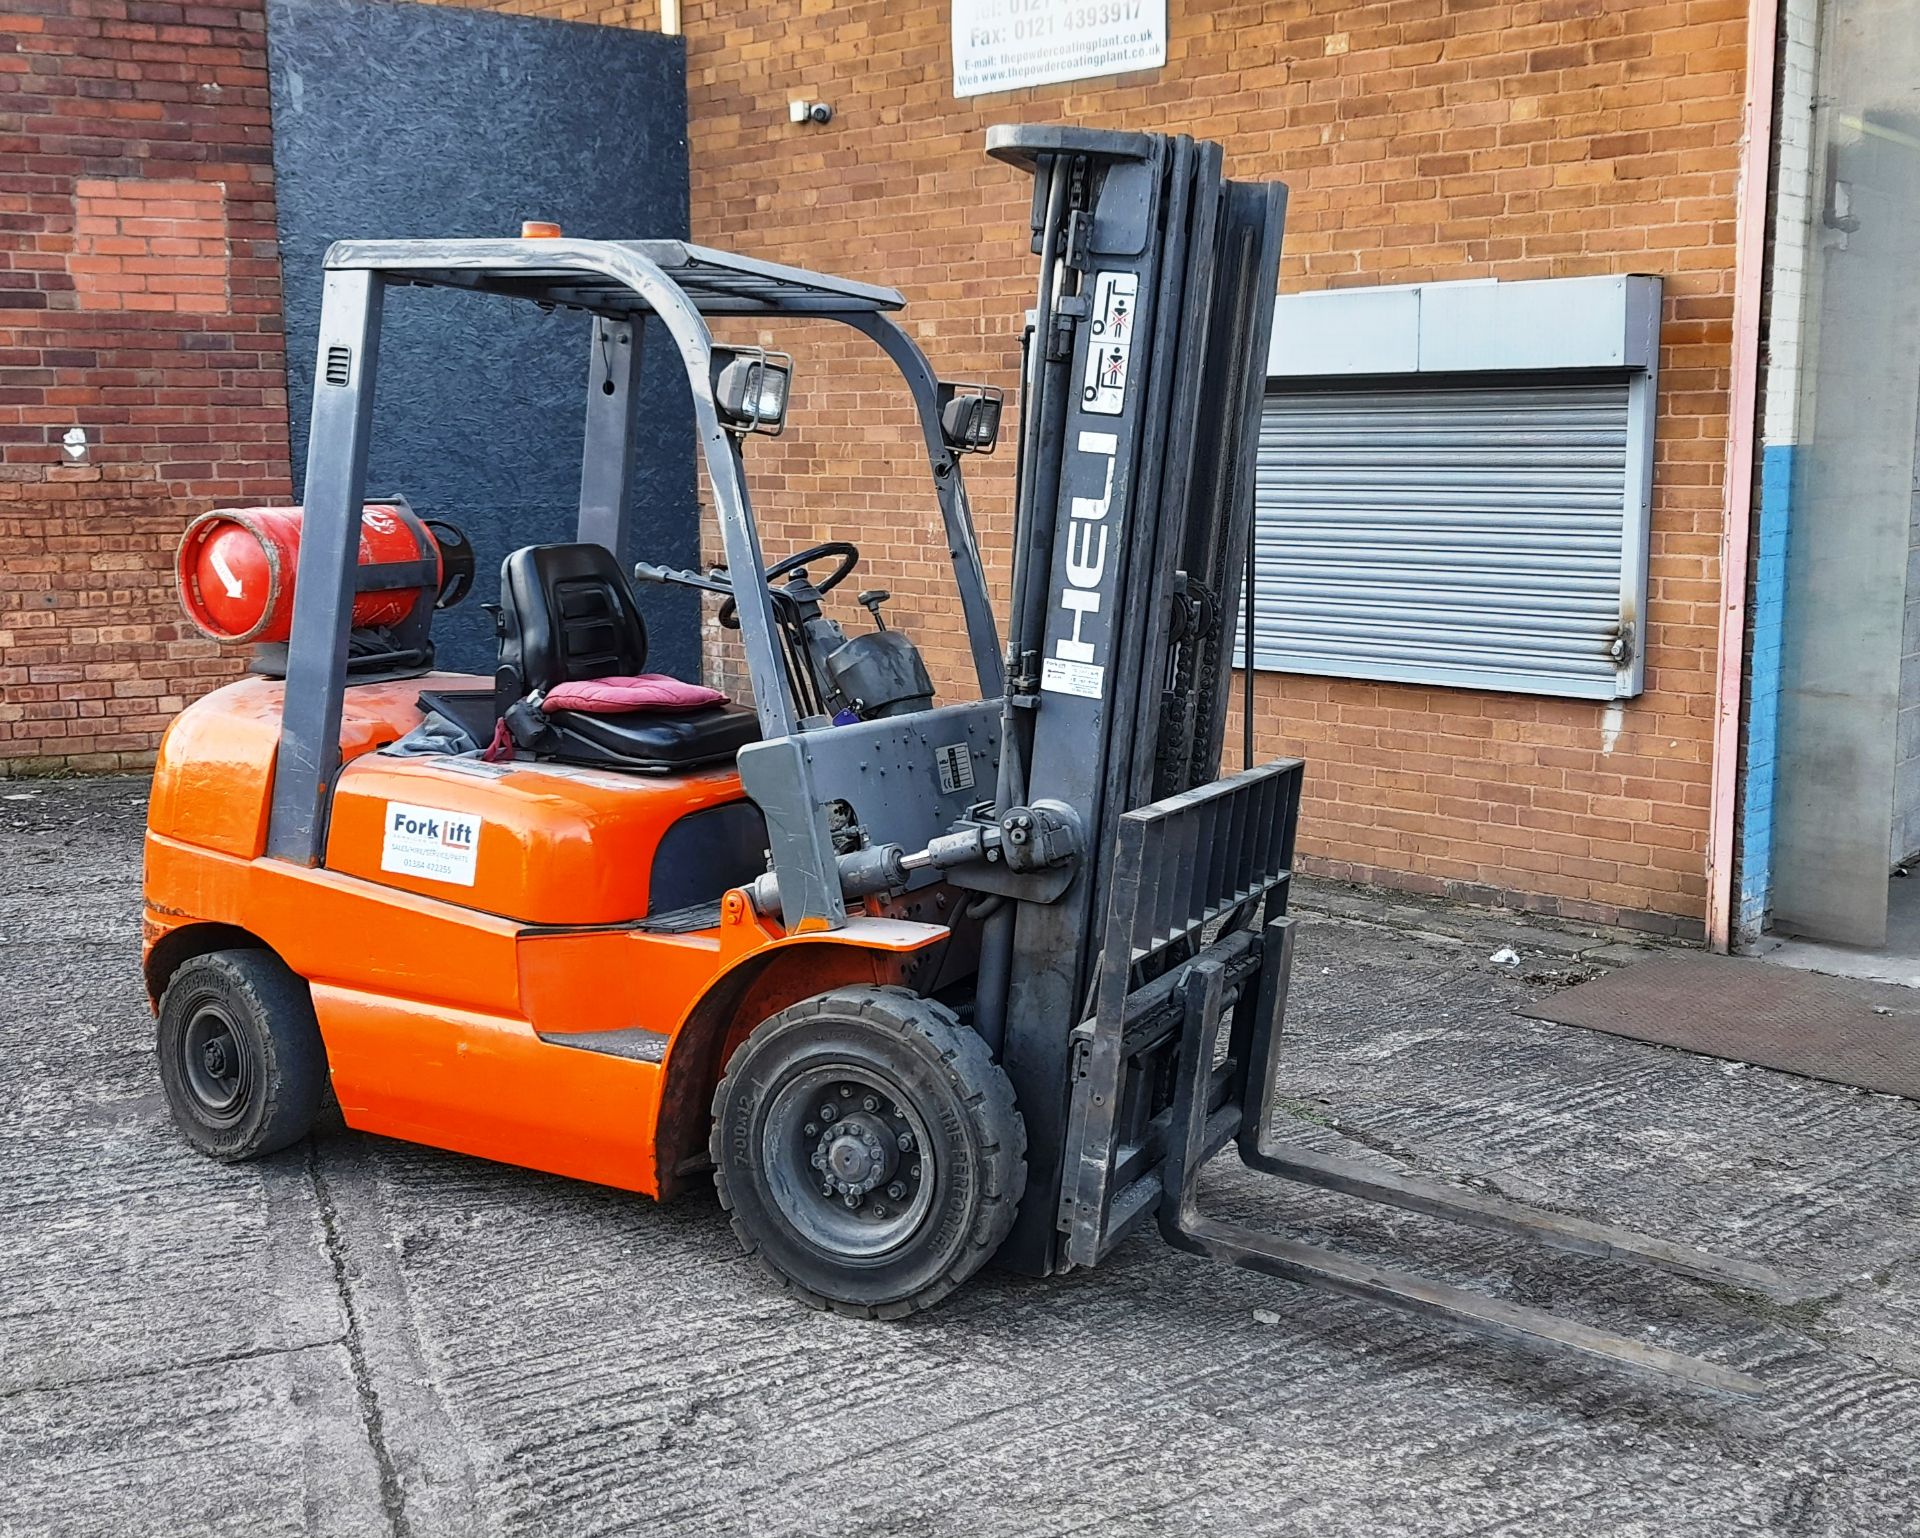 Heli HFG25 LPG forklift truck, Year 2007, Serial Number 0302038099, Rated Capacity 2500KG, Hours - Image 3 of 10